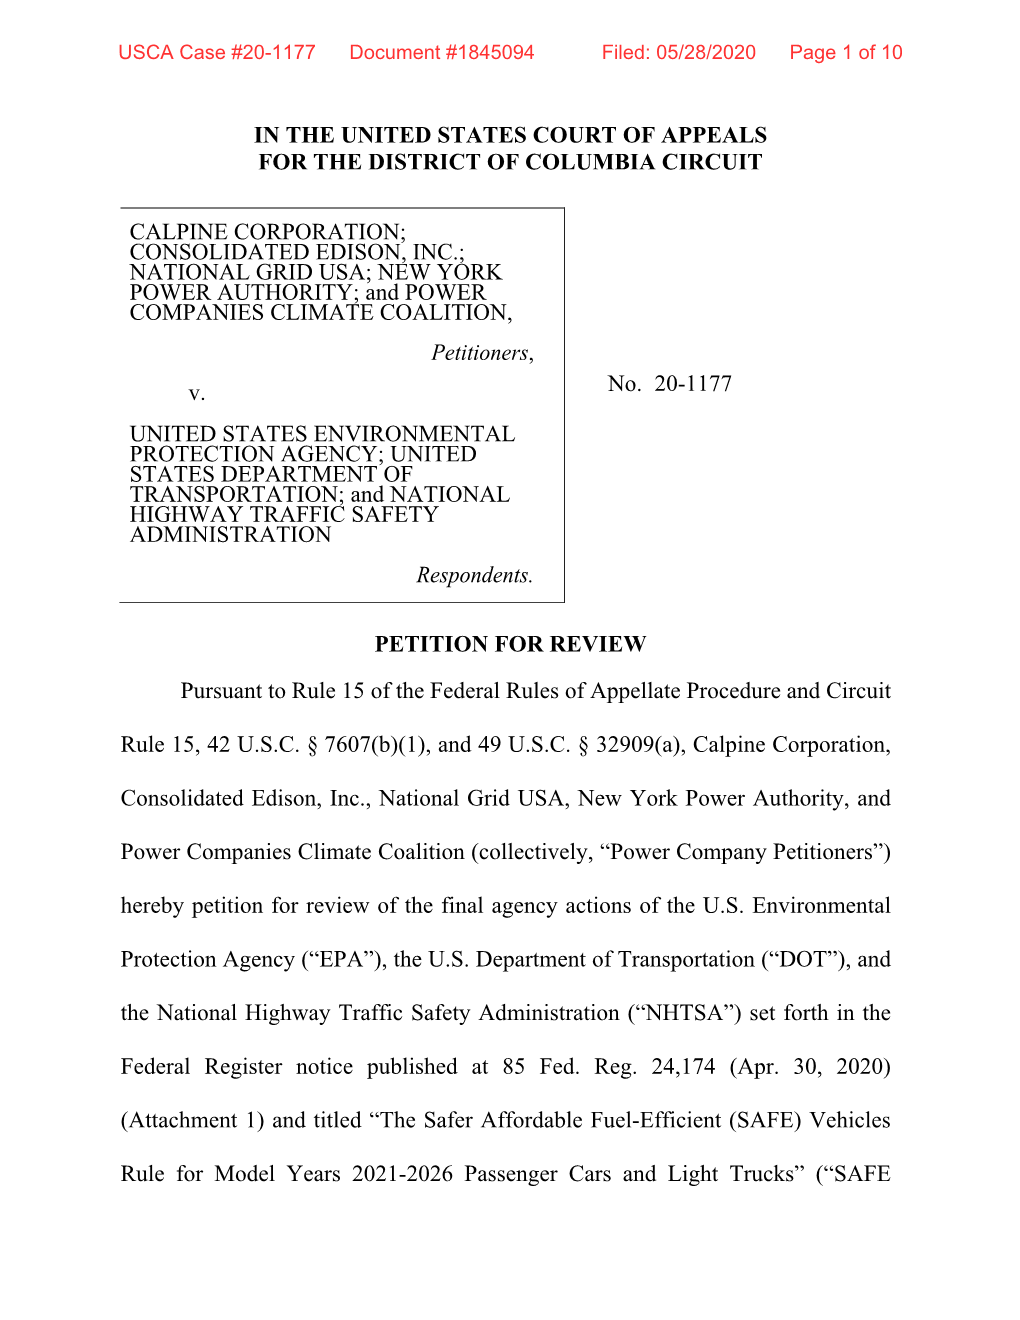 Calpine Corporation, Petition for Review (PDF)